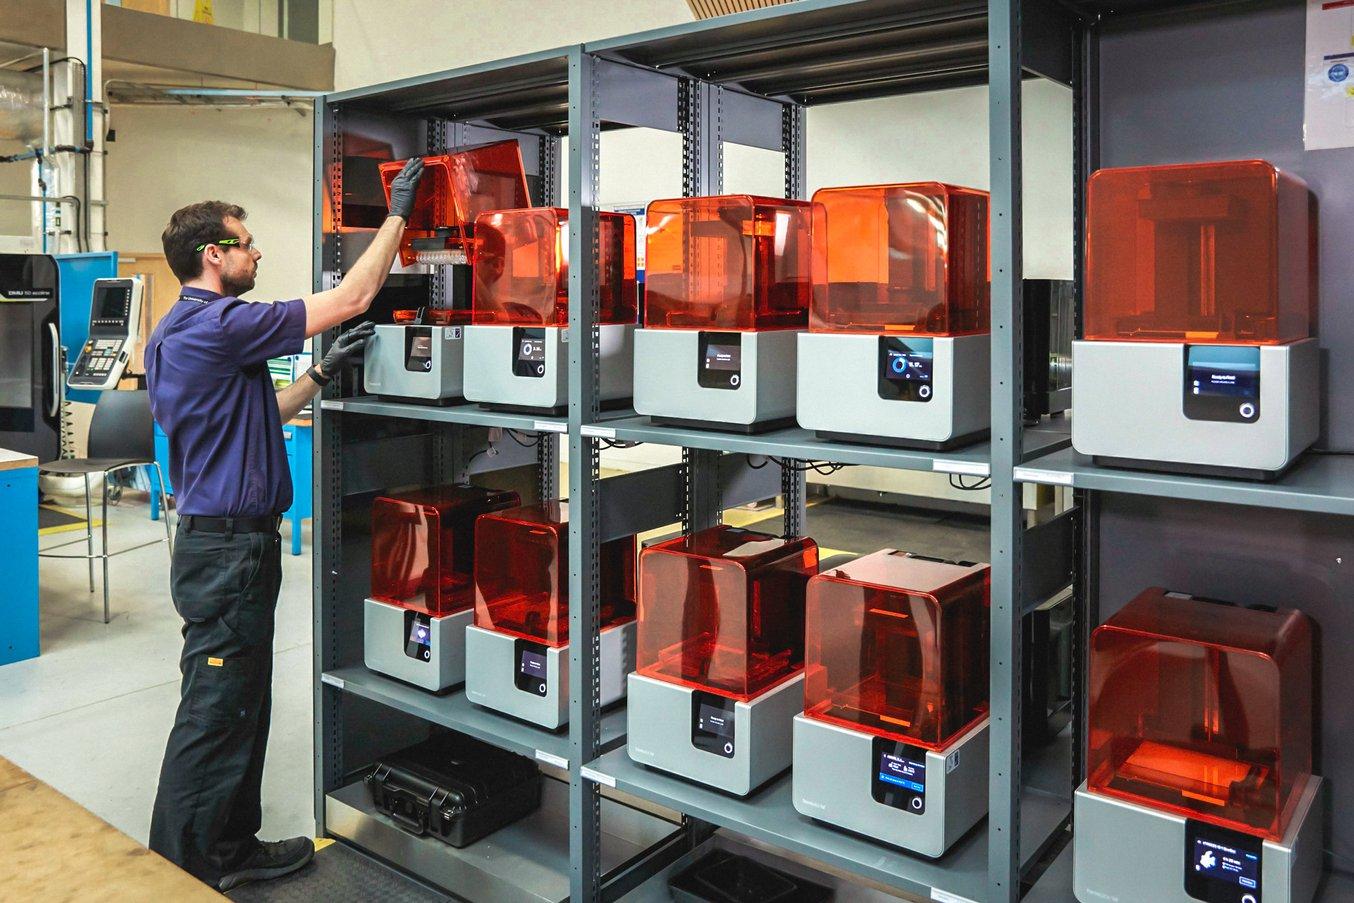 The Design and Prototyping Group at the University of Sheffield Advanced Manufacturing Research Centre (AMRC) runs an open-access additive manufacturing station with a fleet of 12 Form 2 stereolithography (SLA) 3D printers